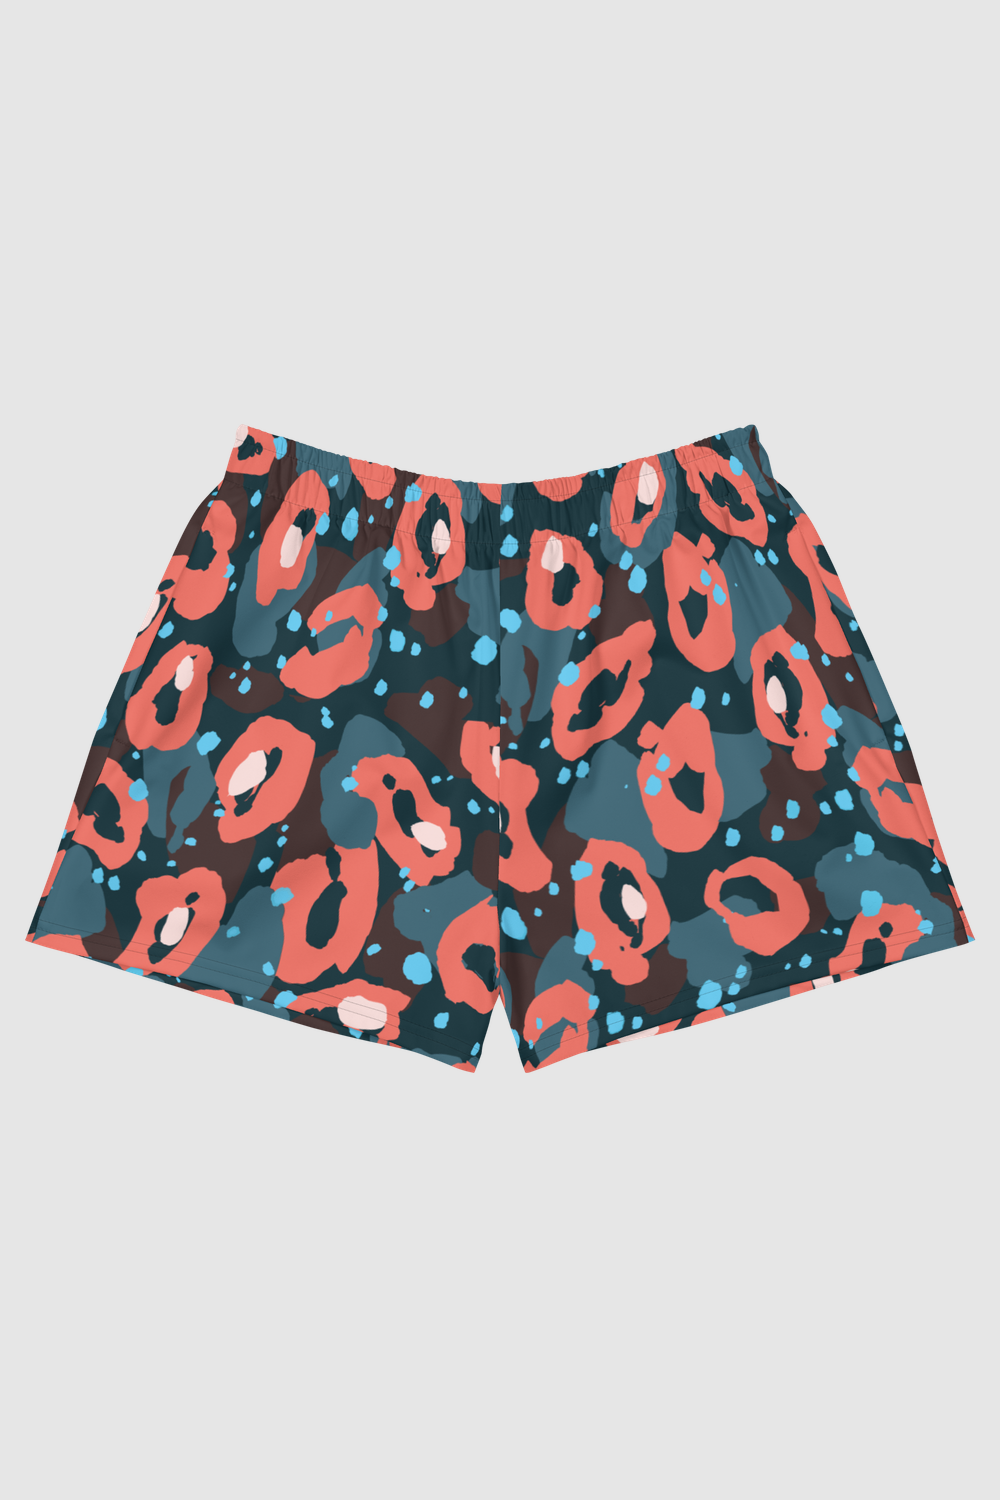 Coral Leopard Print Women’s Recycled Athletic Shorts